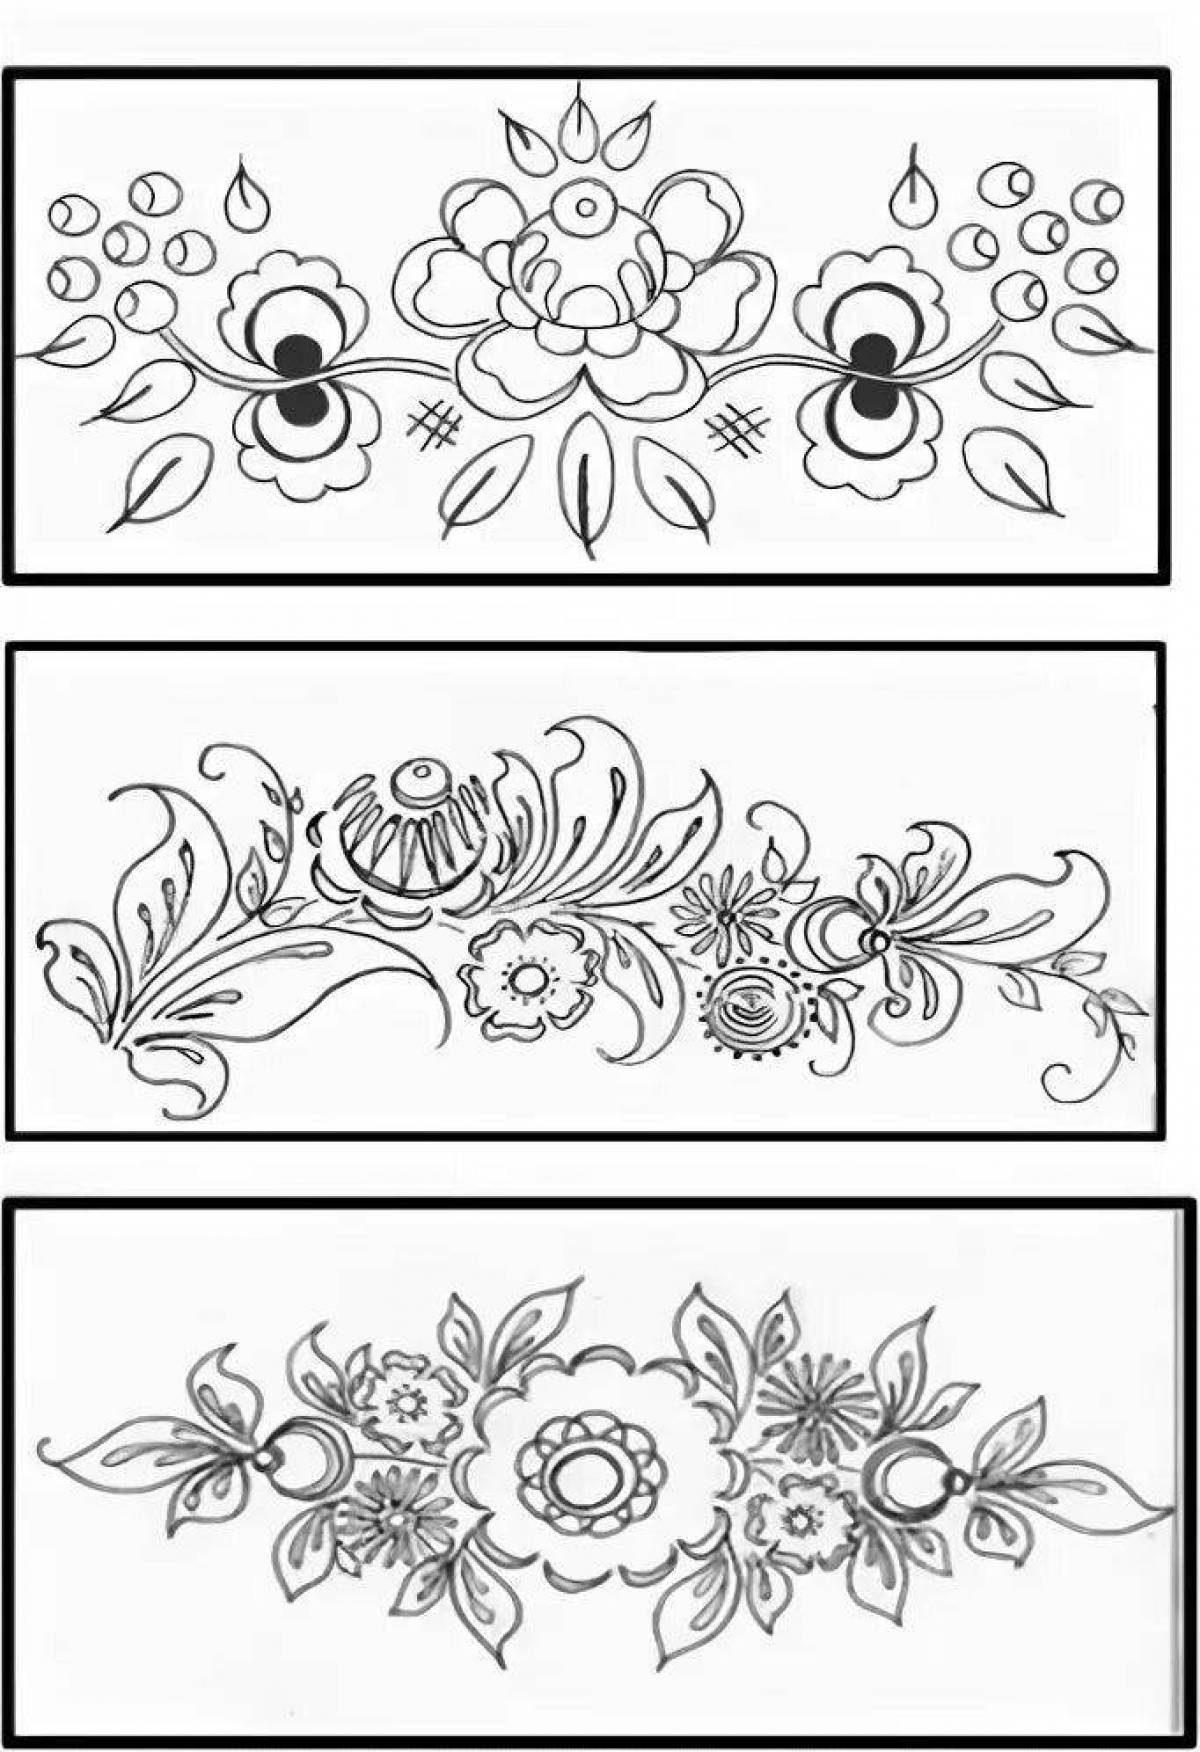 Coloring page with stripes pattern